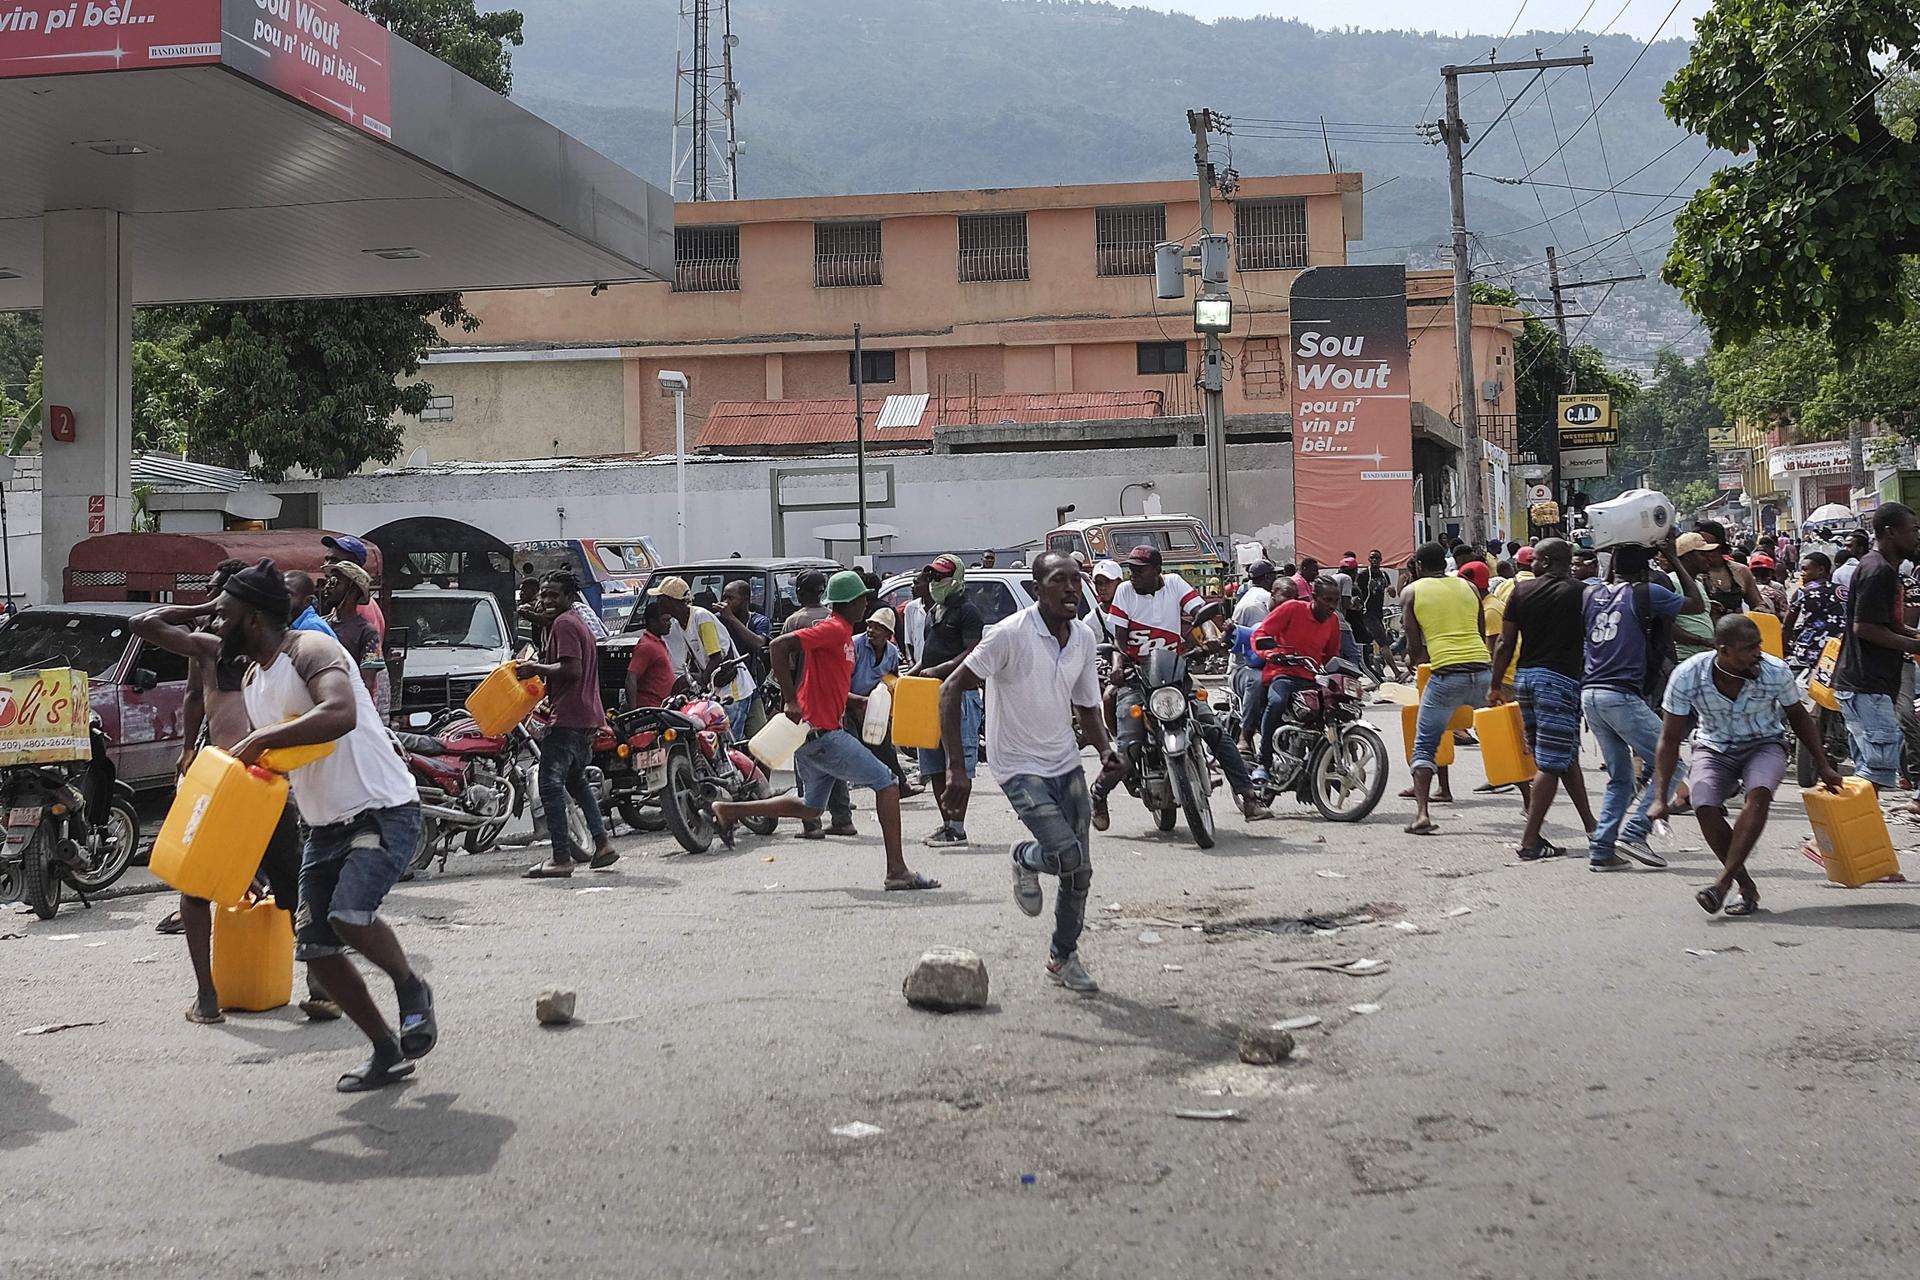 People run for cover as police shoot into the air to disperse a crowd threatening to burn down a gas station because they believed the station was withholding the gas, in Port-au-Prince, Haiti, on Oct. 23, 2021. The ongoing fuel shortage has worsened, wit